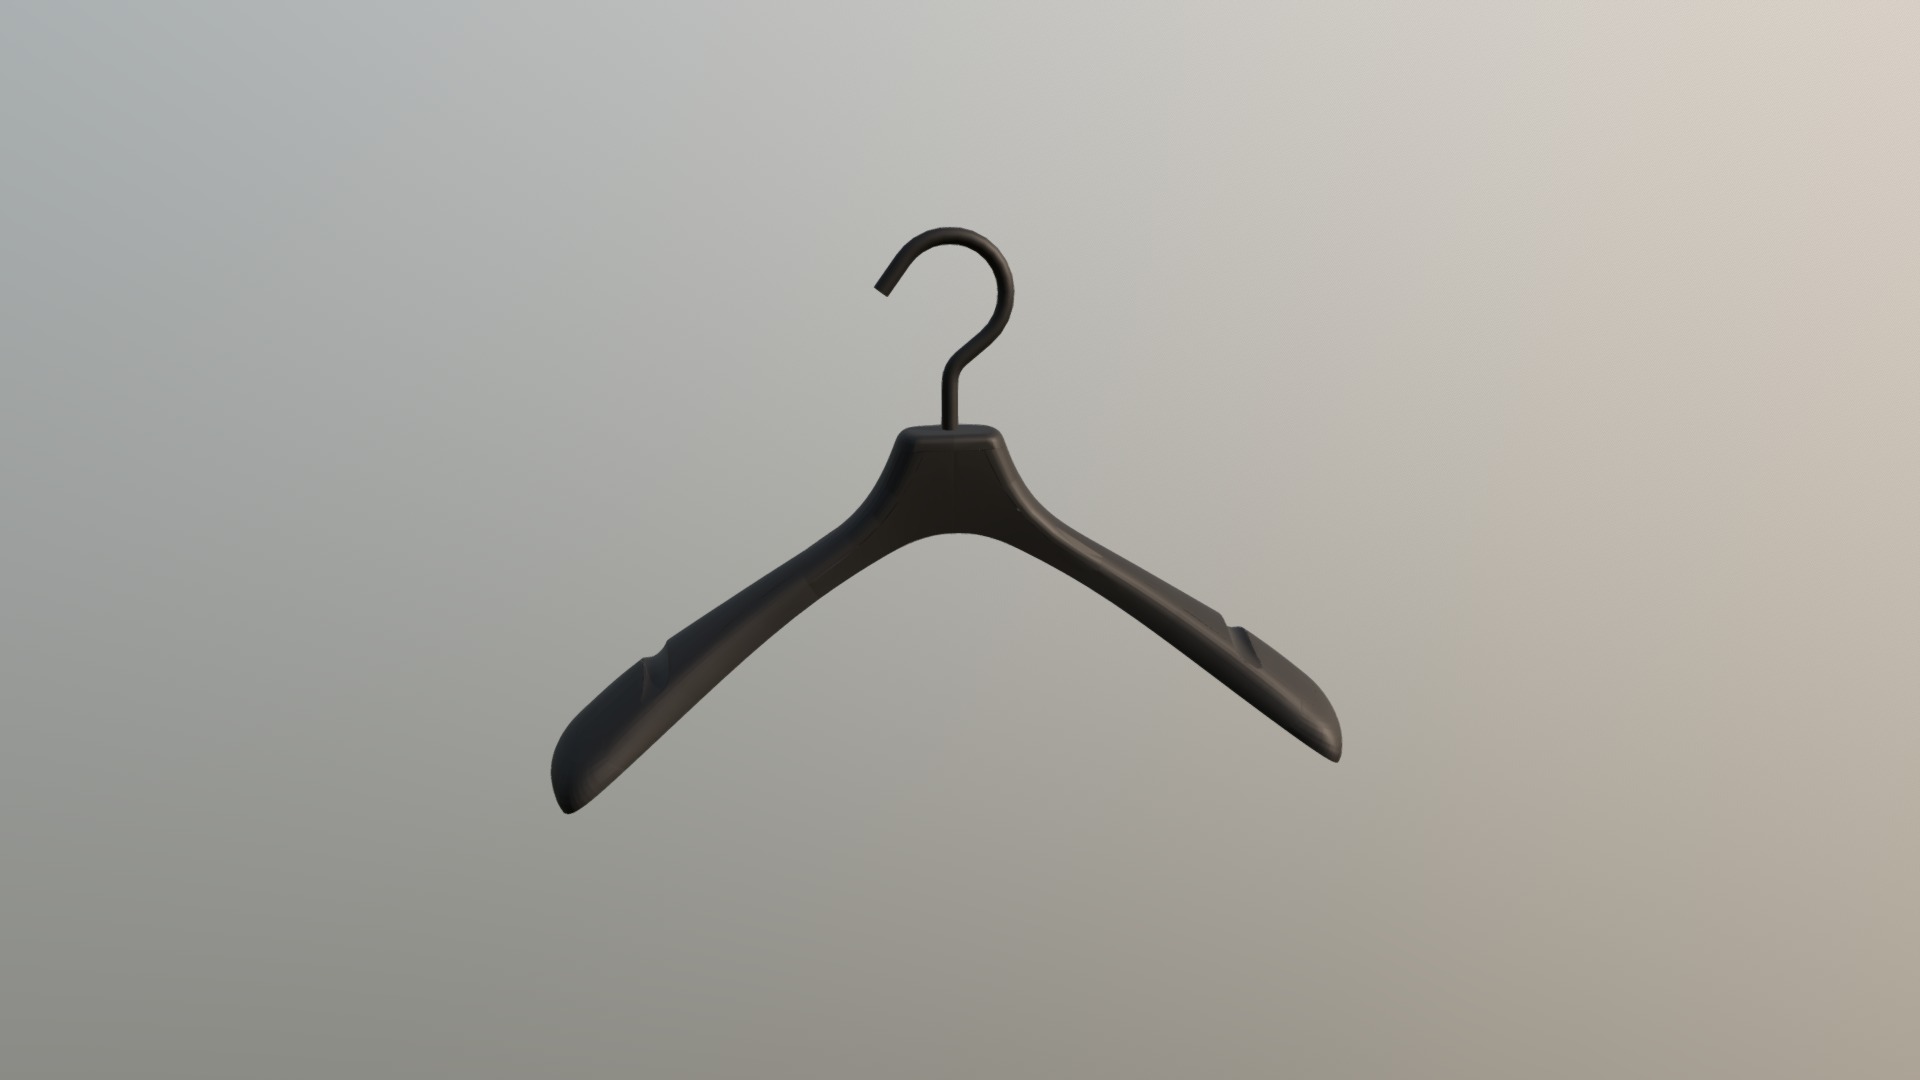 3D model Clothing Hanger - This is a 3D model of the Clothing Hanger. The 3D model is about a black and silver chair.